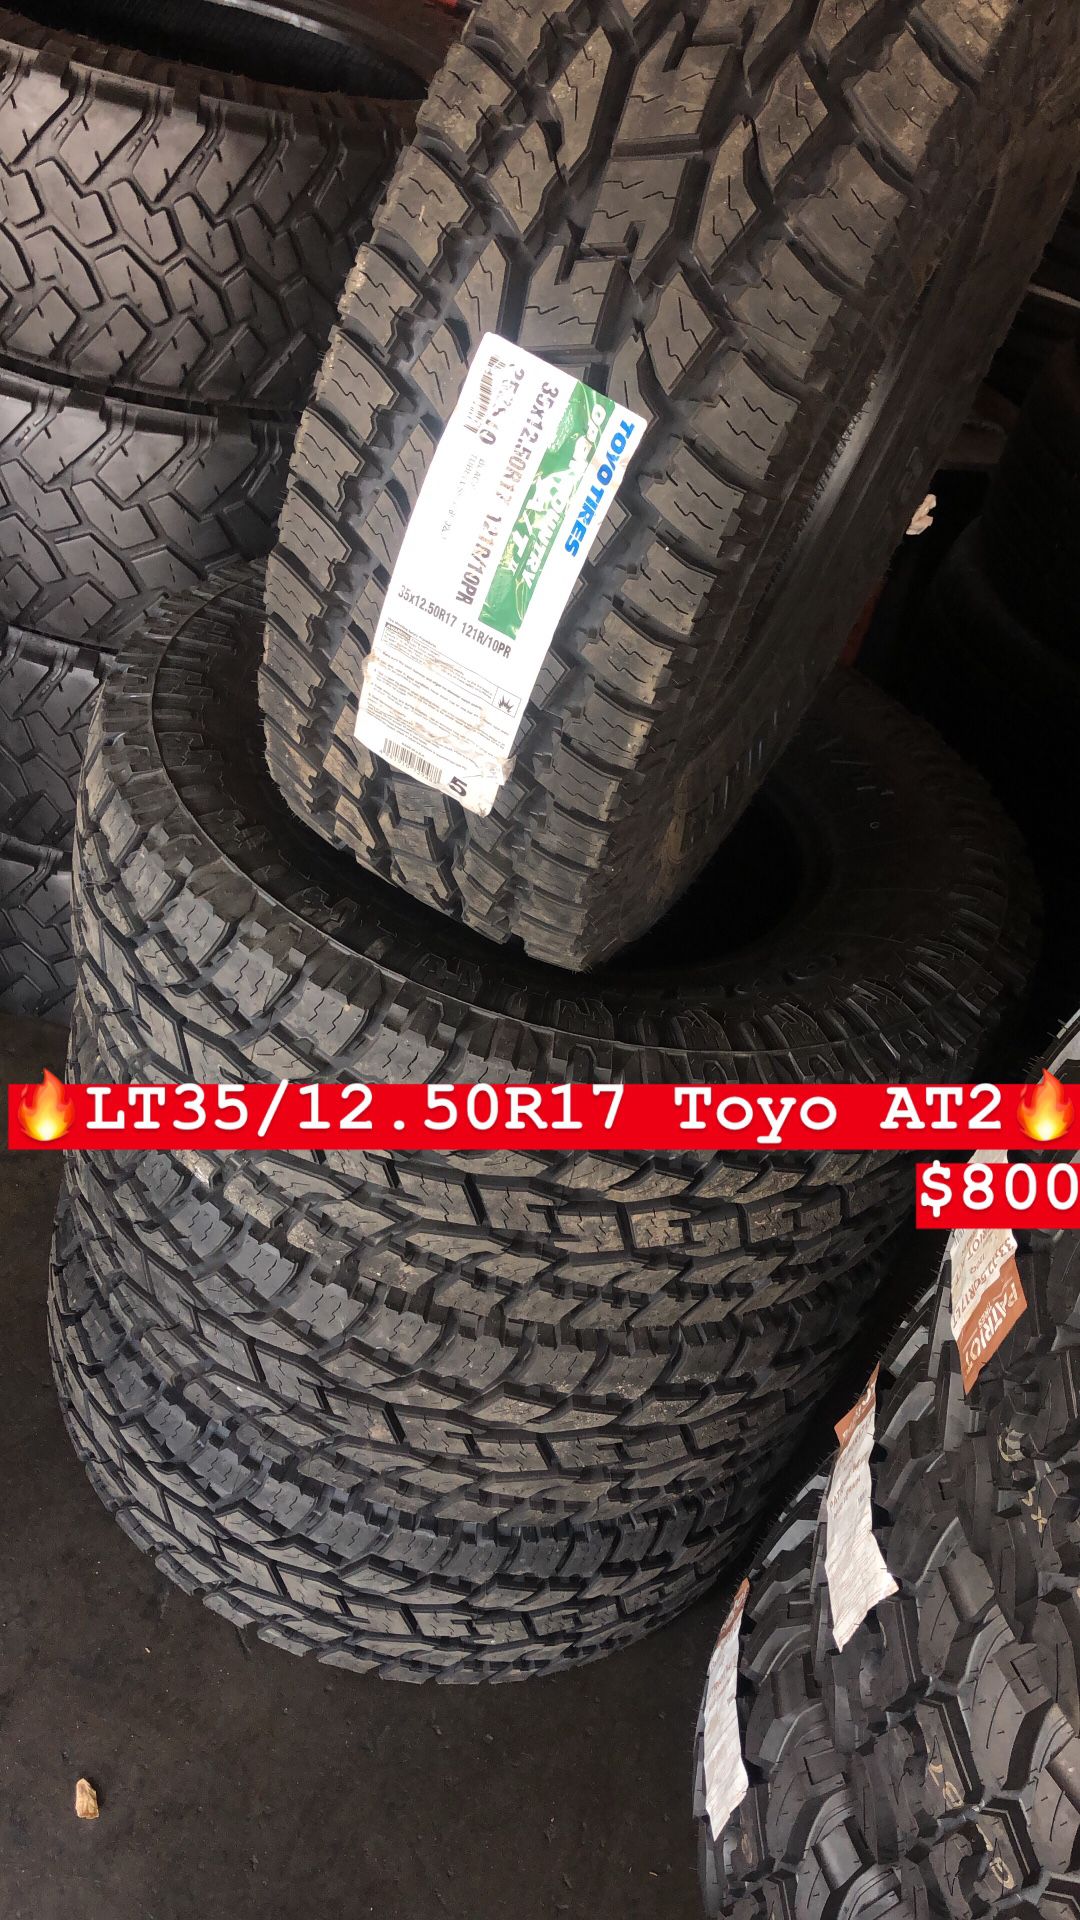 35/12.50R17 Toyo All terrain tires (4 for $800)